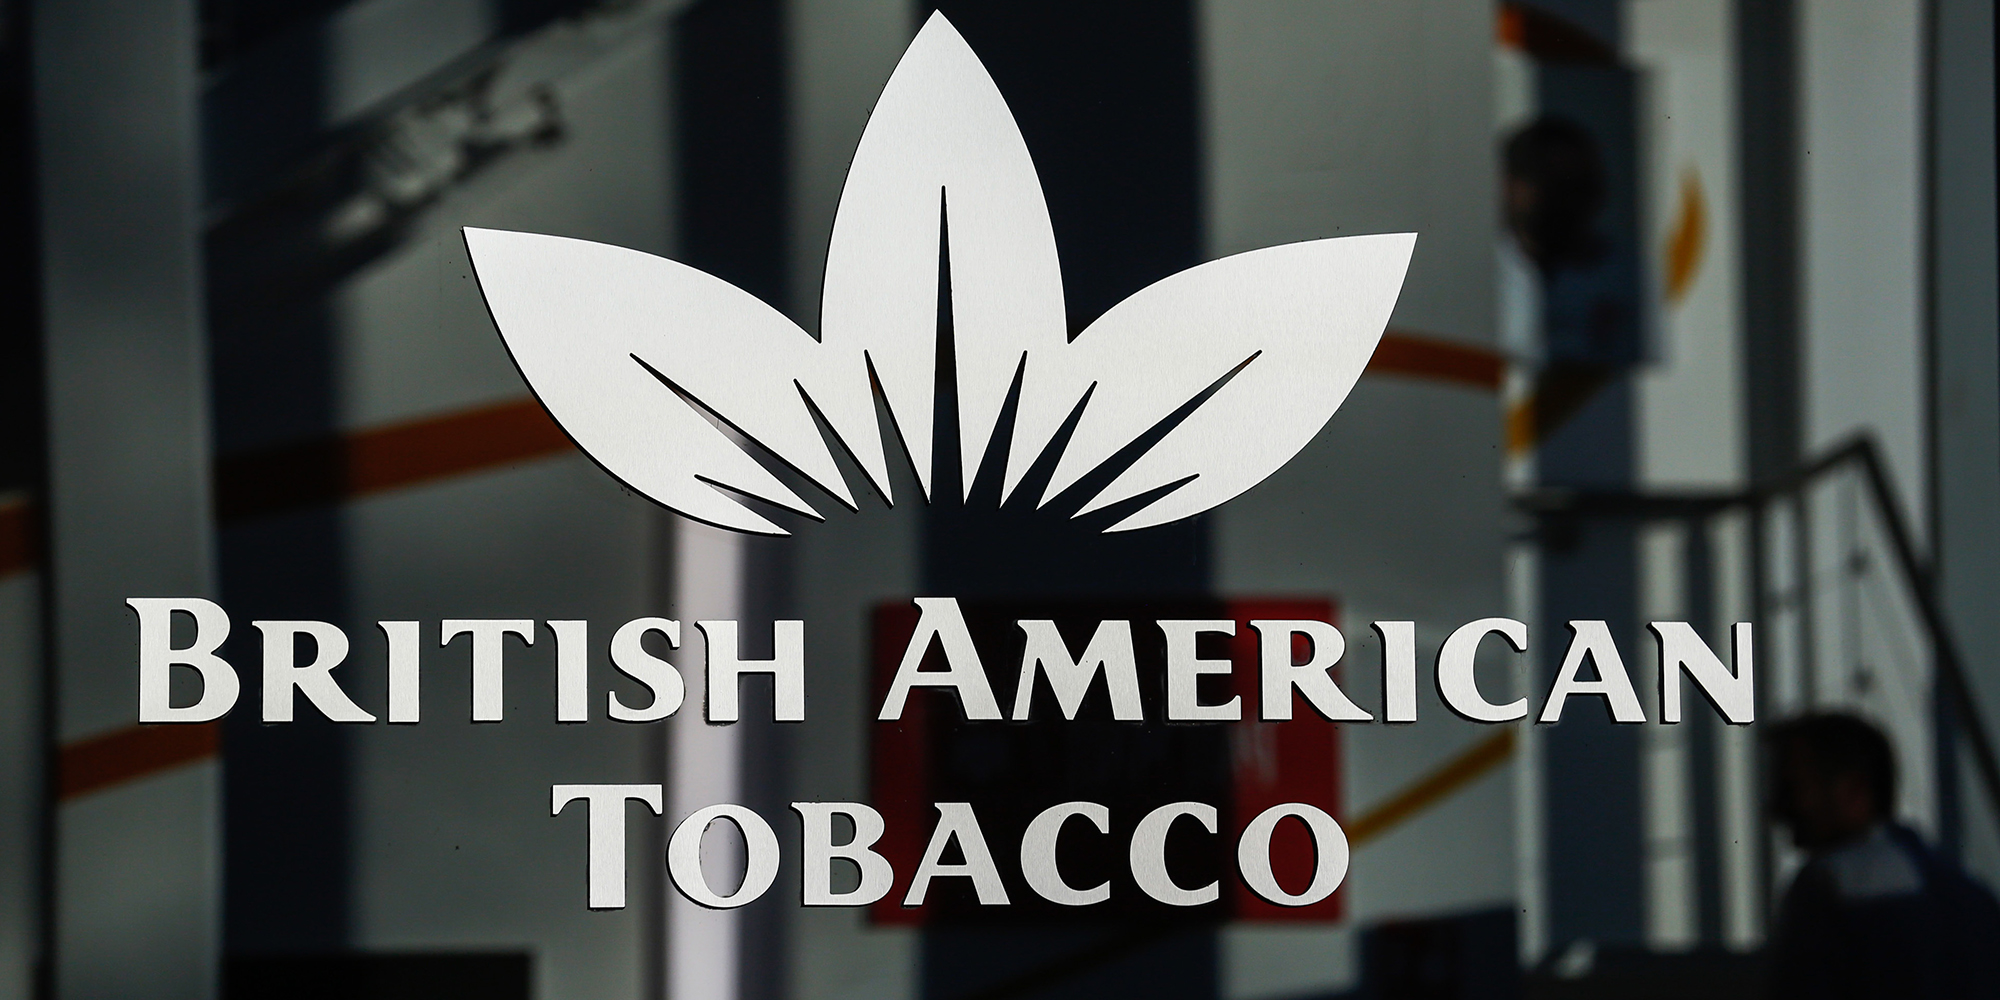 Vaping products heat up British American Tobacco’s bottom line